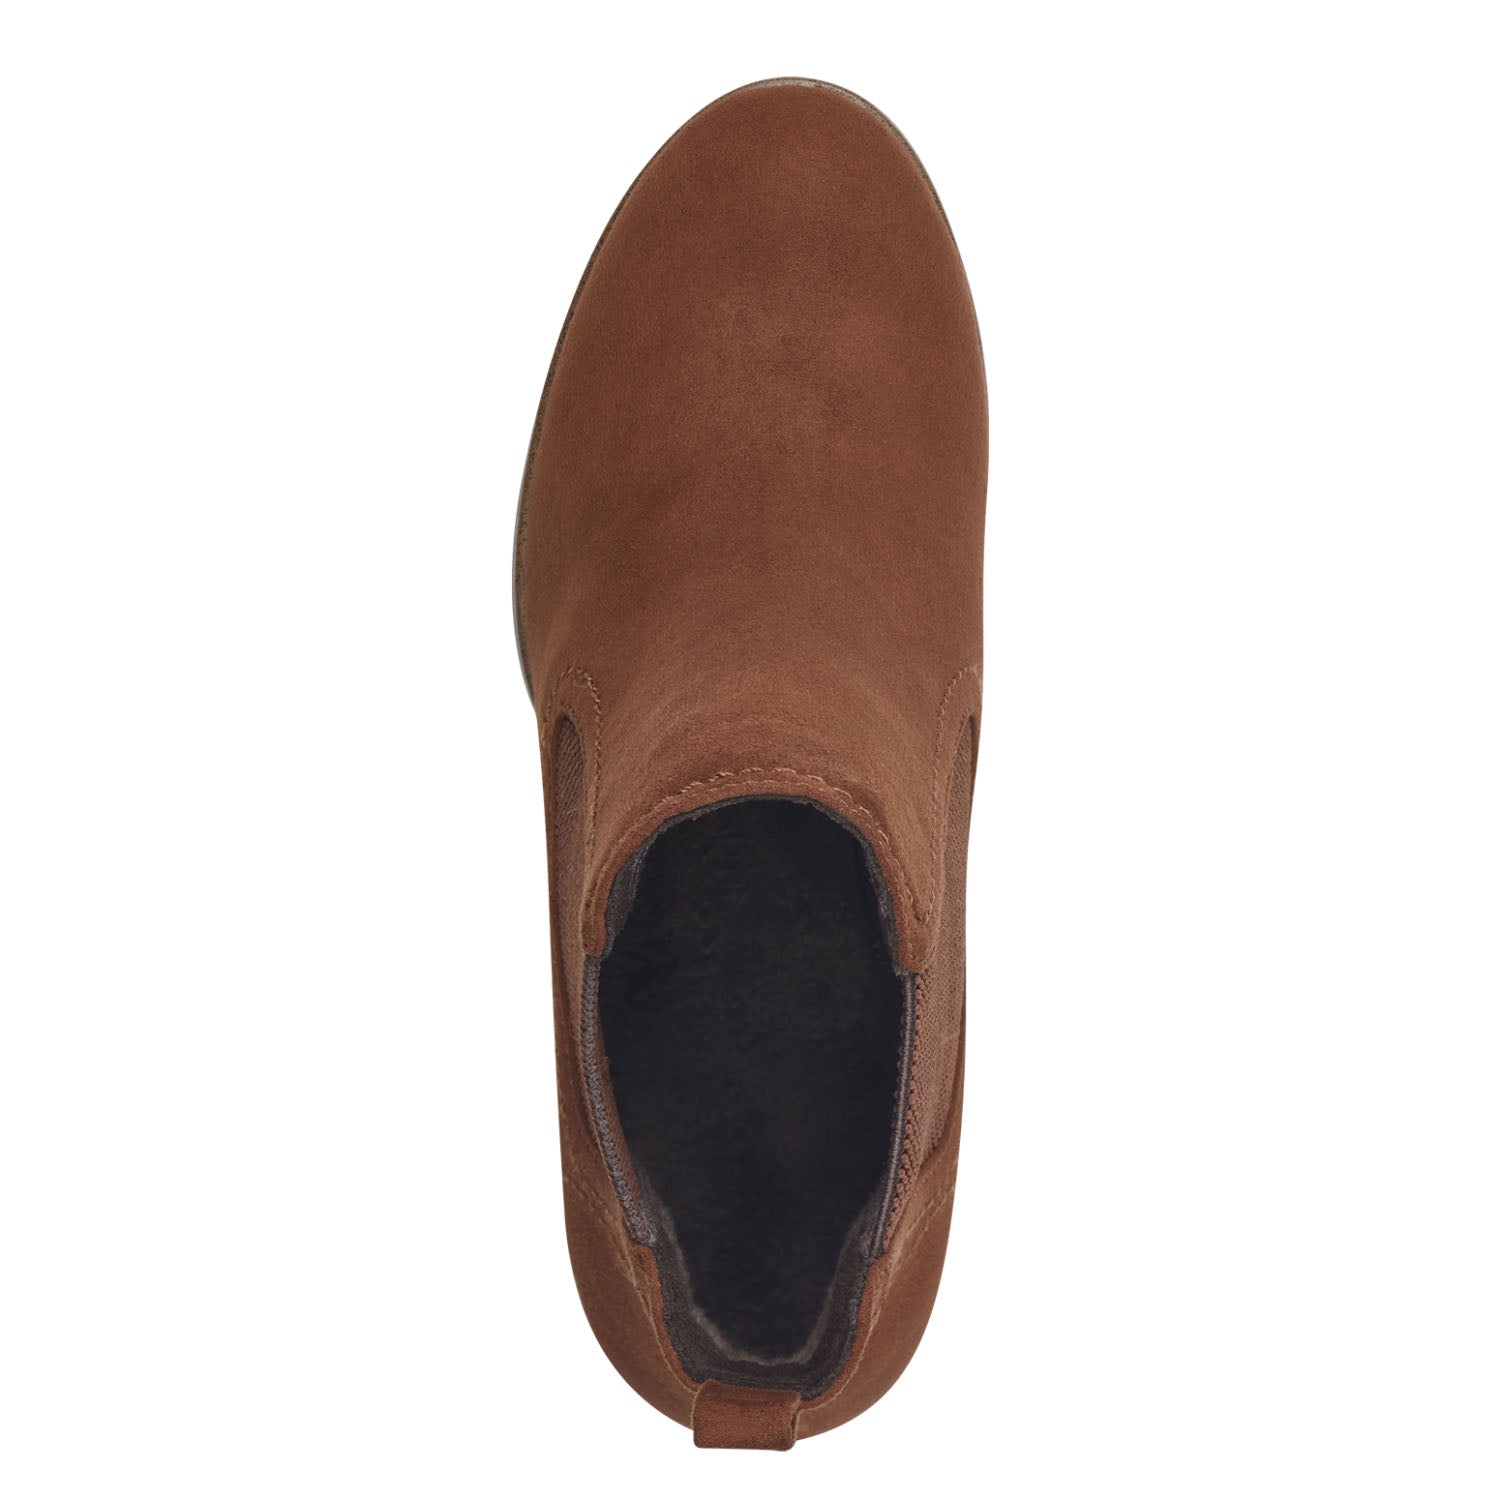 Overhead view of Marco Tozzi Chelsea Boot.